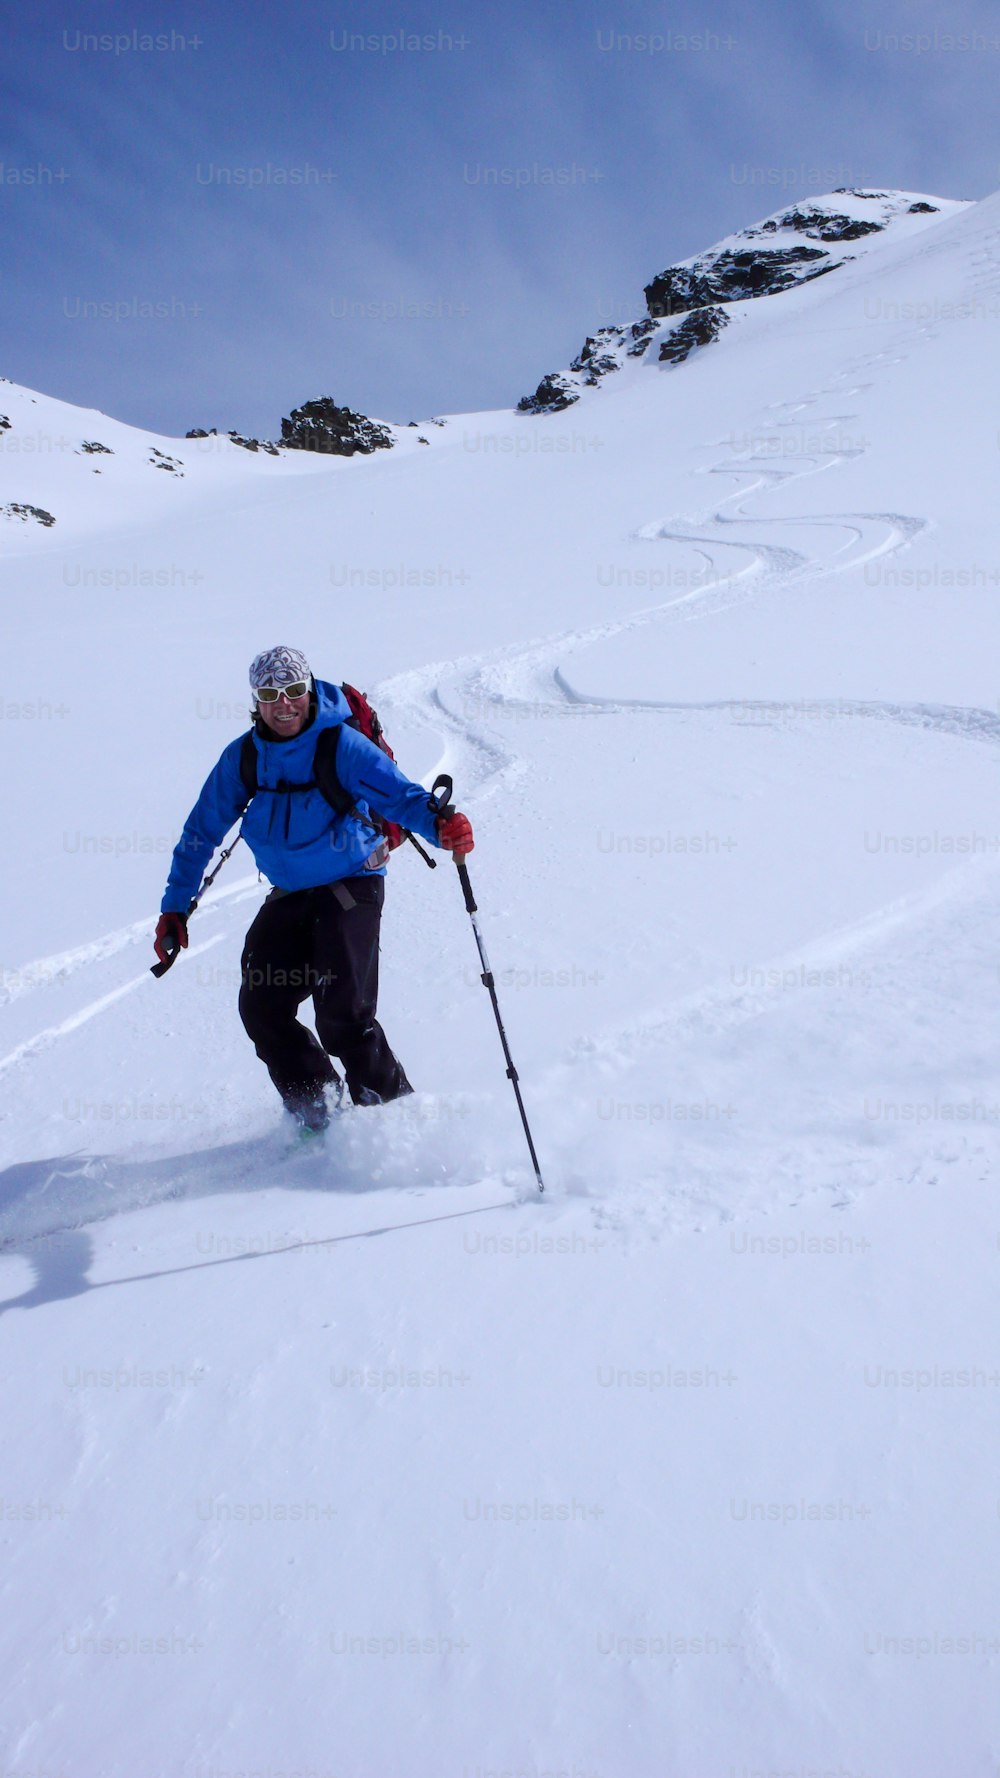 male skier and fresh tracks in untouched powder snow in the backcountry of the Swiss Alps near St. Moritz